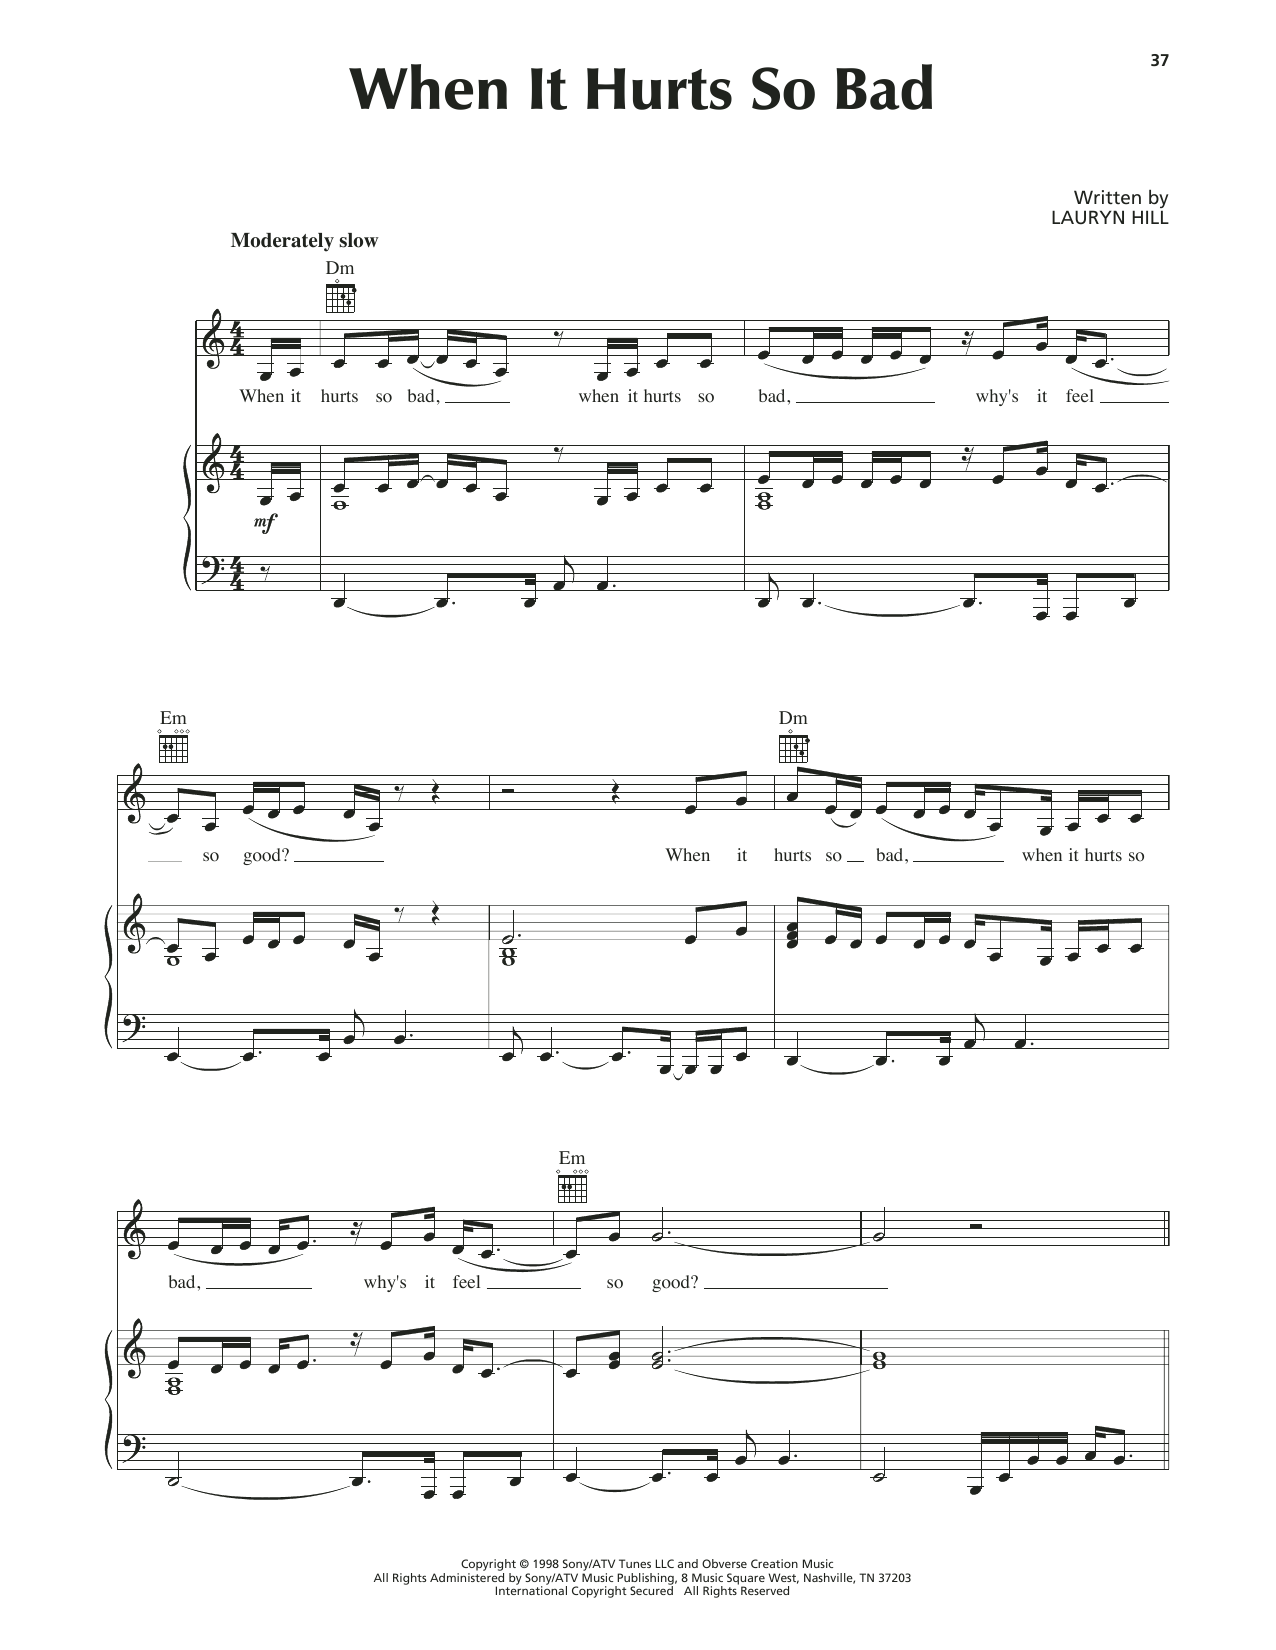 Download Lauryn Hill When It Hurts So Bad Sheet Music